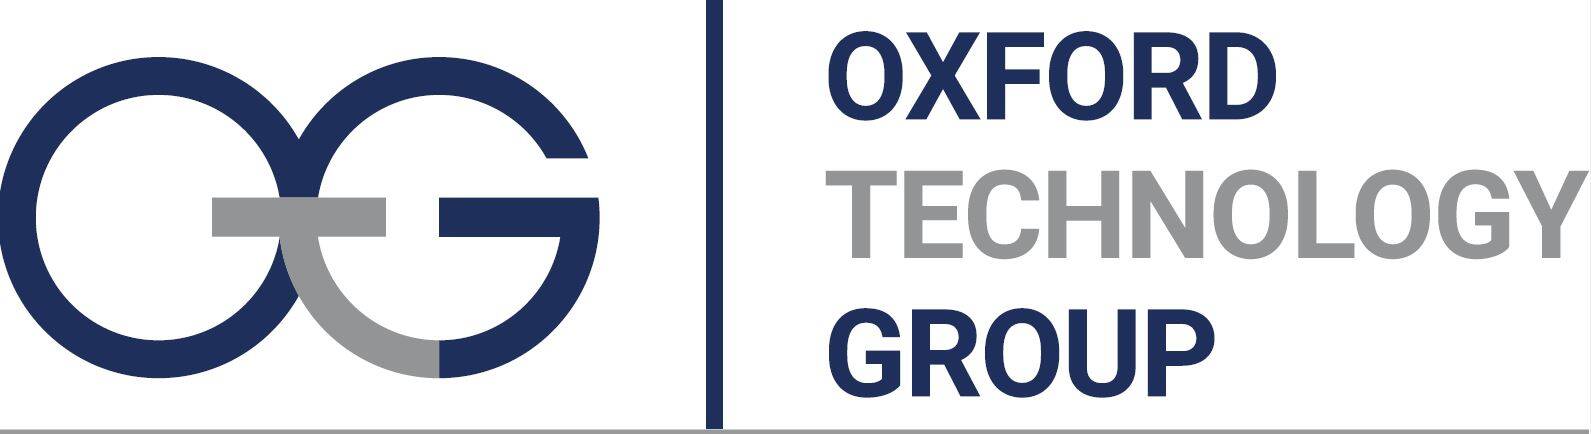 Oxford Technology Group